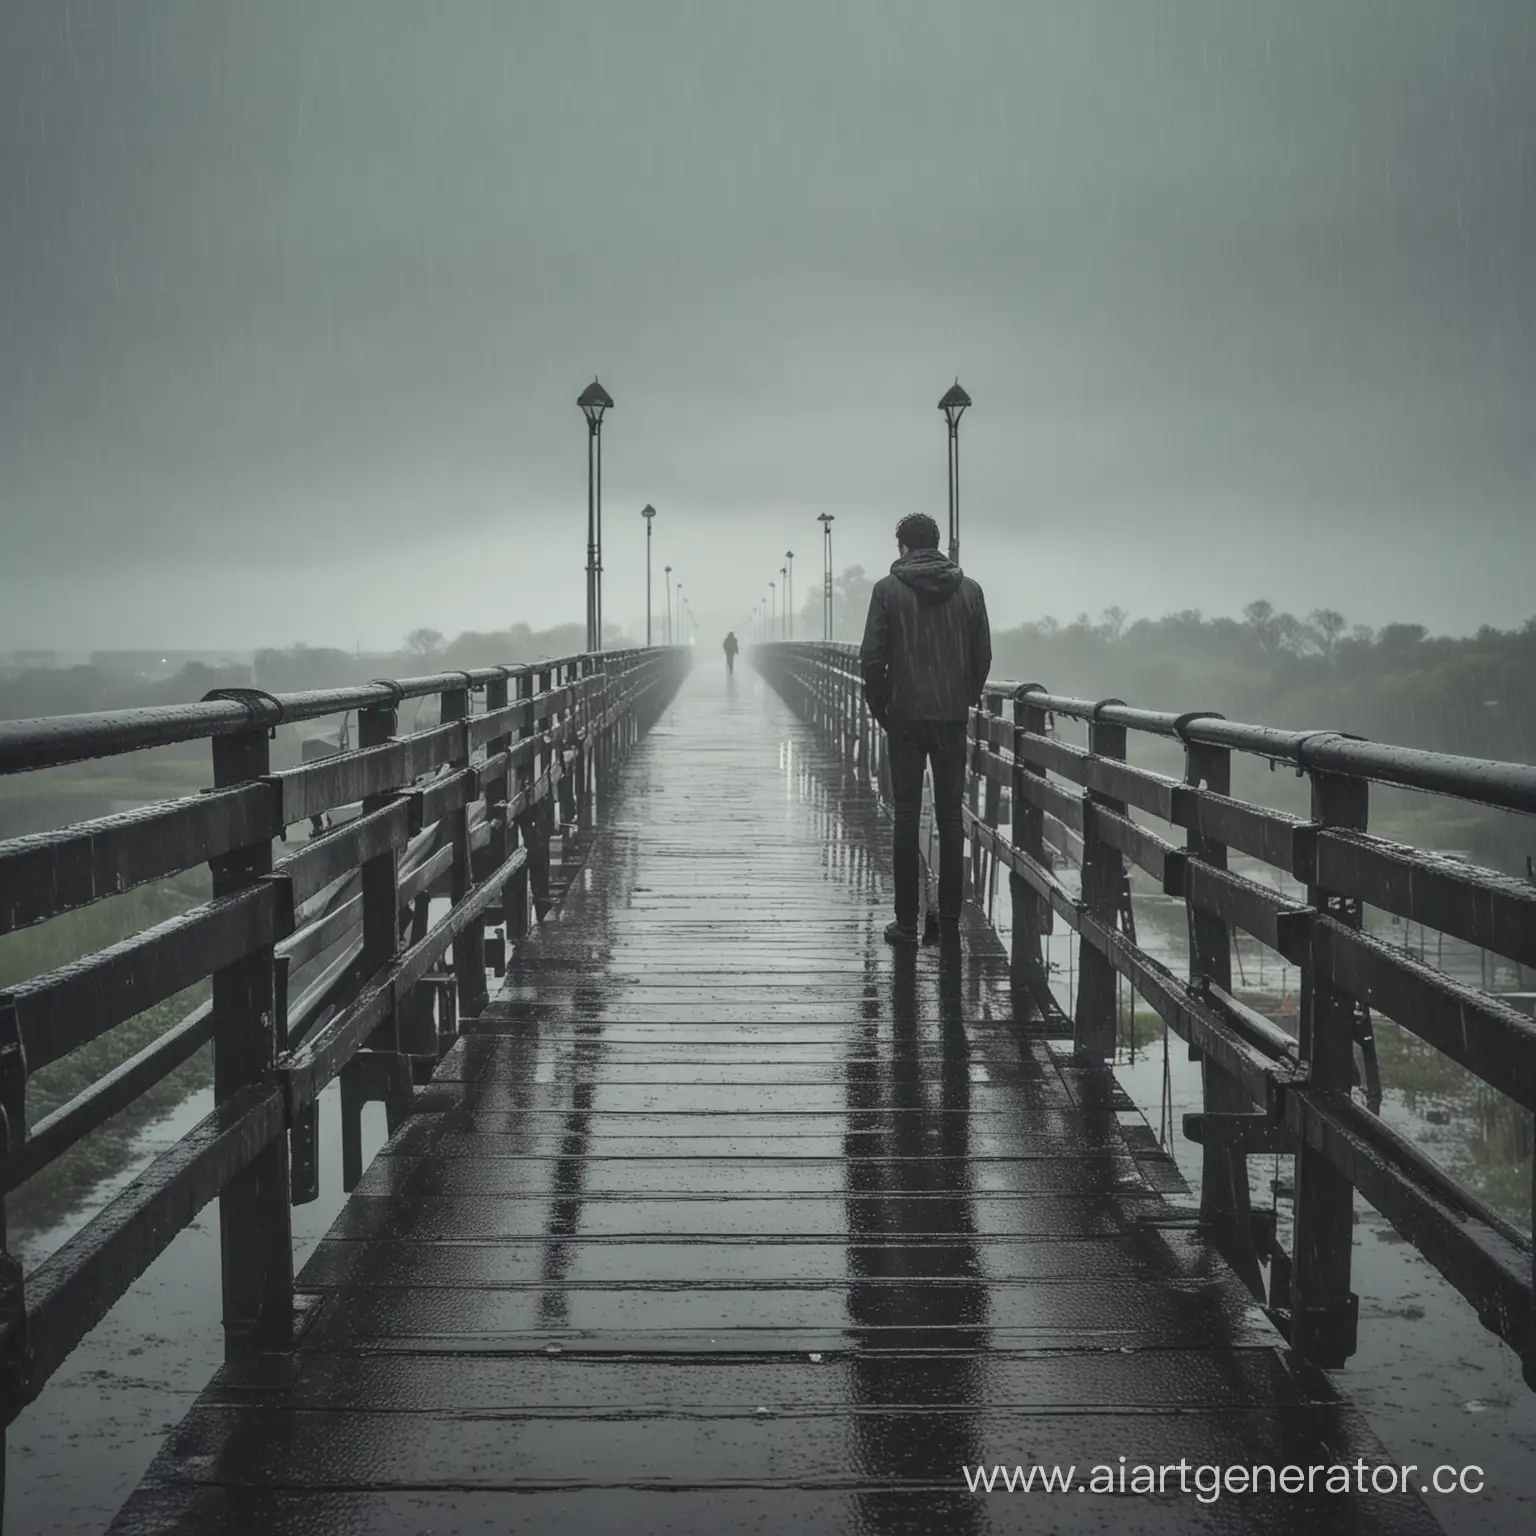 Lonely-Man-Standing-by-Bridge-in-Gloomy-Rainy-Weather